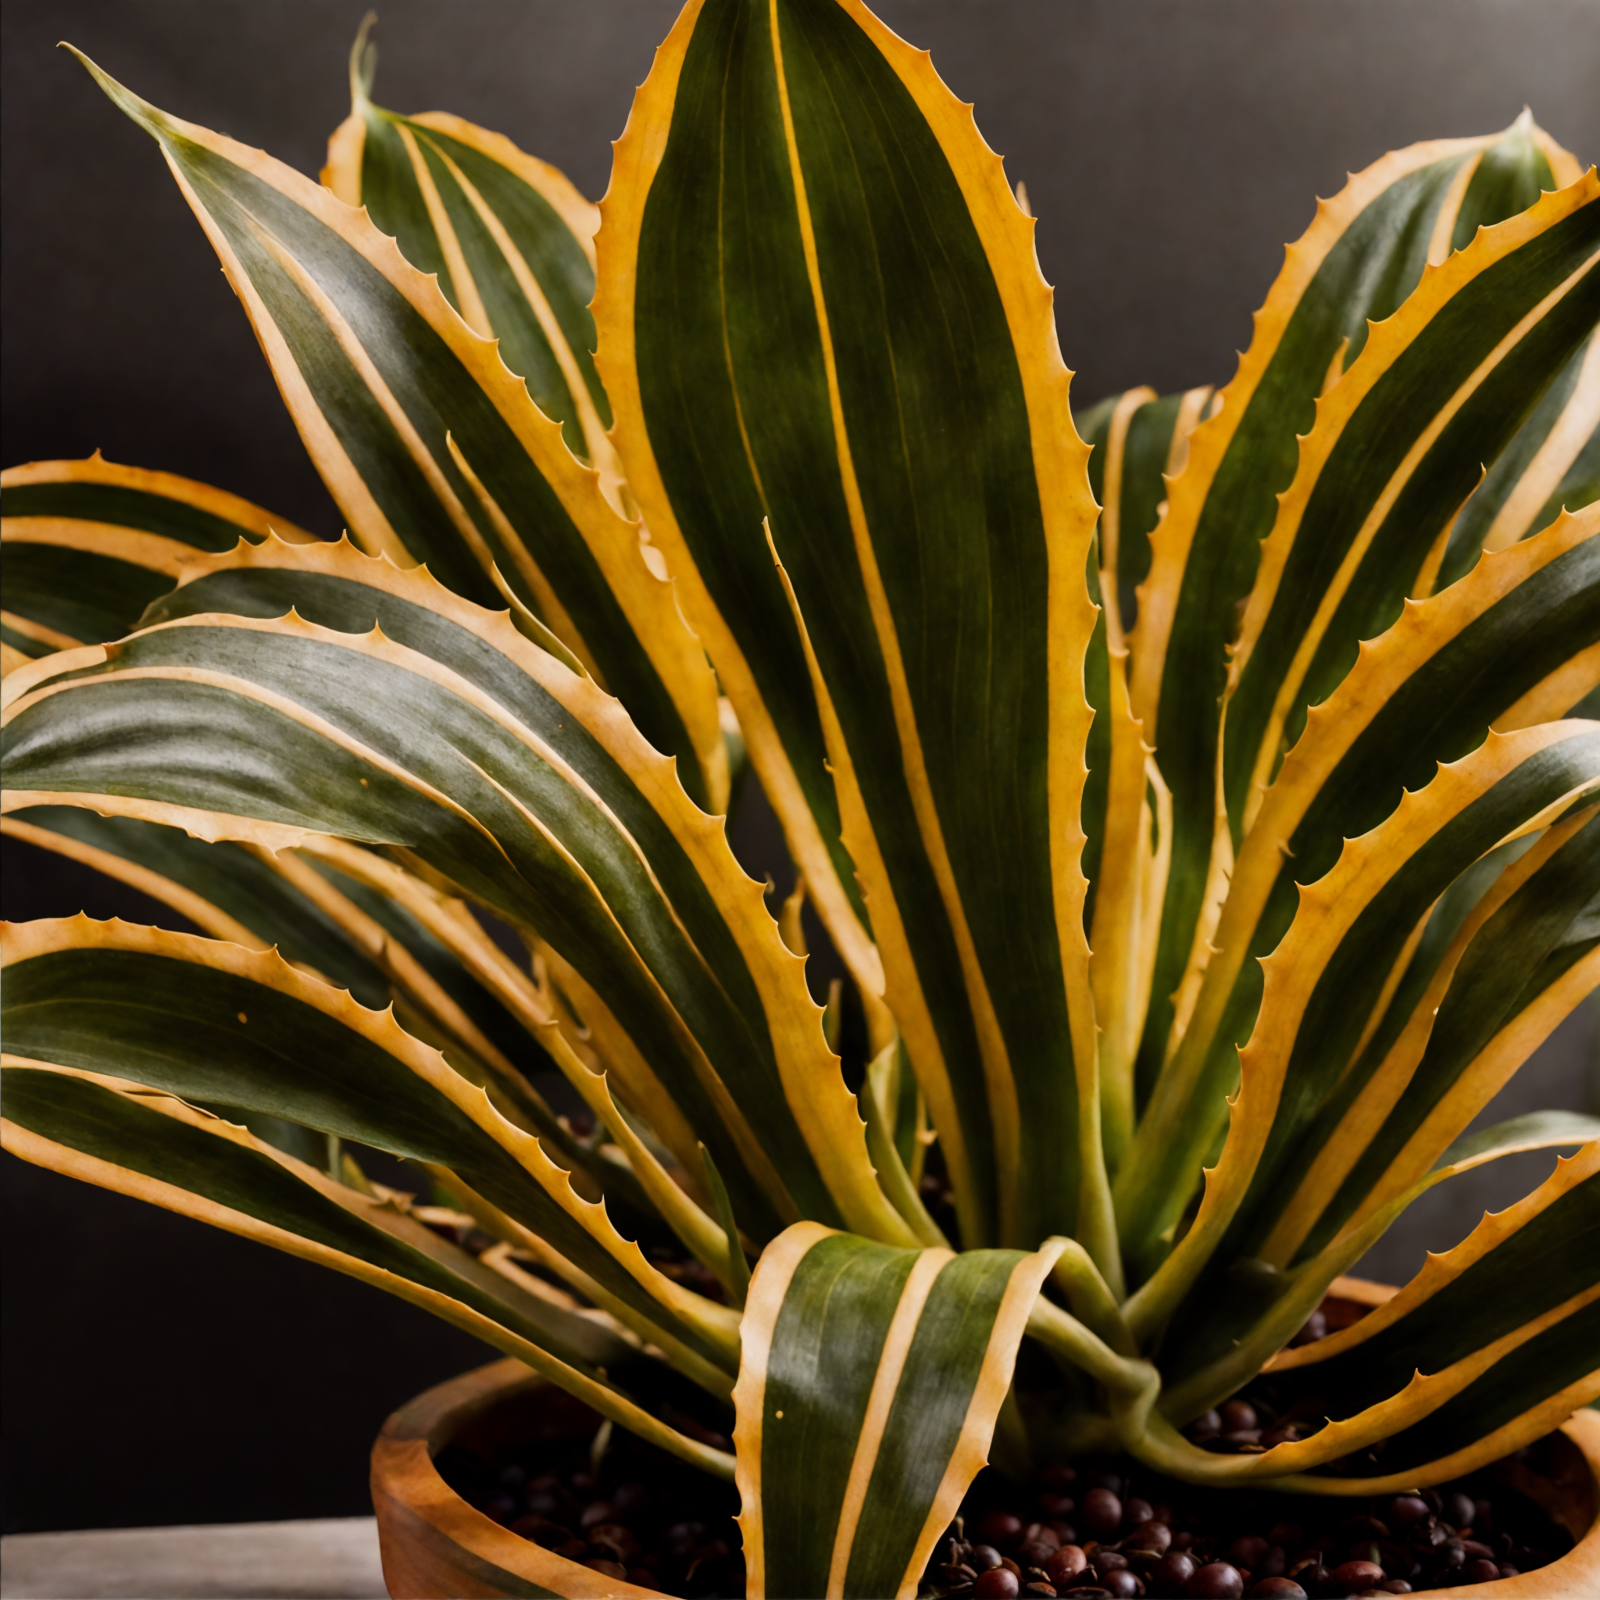 Agave americana in a planter, with a dark background and clear lighting, part of indoor décor.